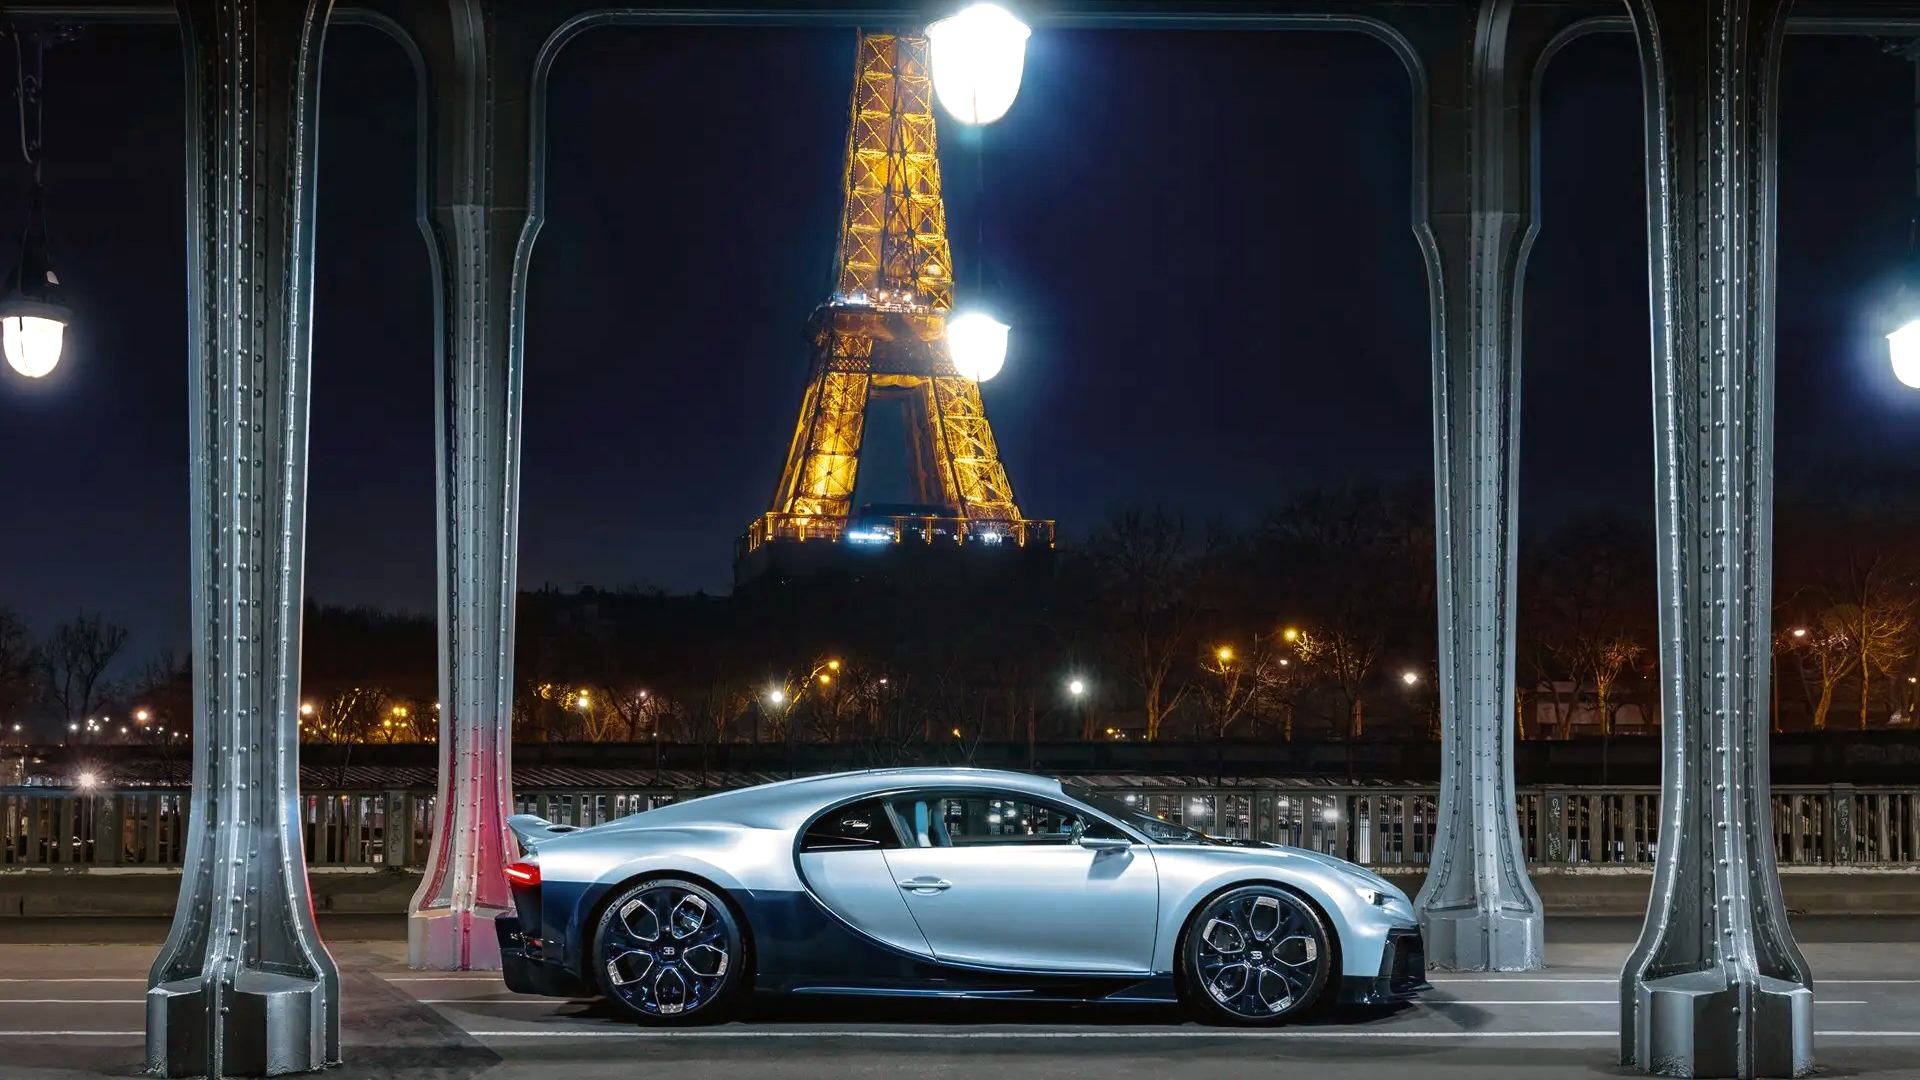 The elegance of the Chiron Profilée with the Paris frame for the event in which more than 10 million dollars were paid for the purchase